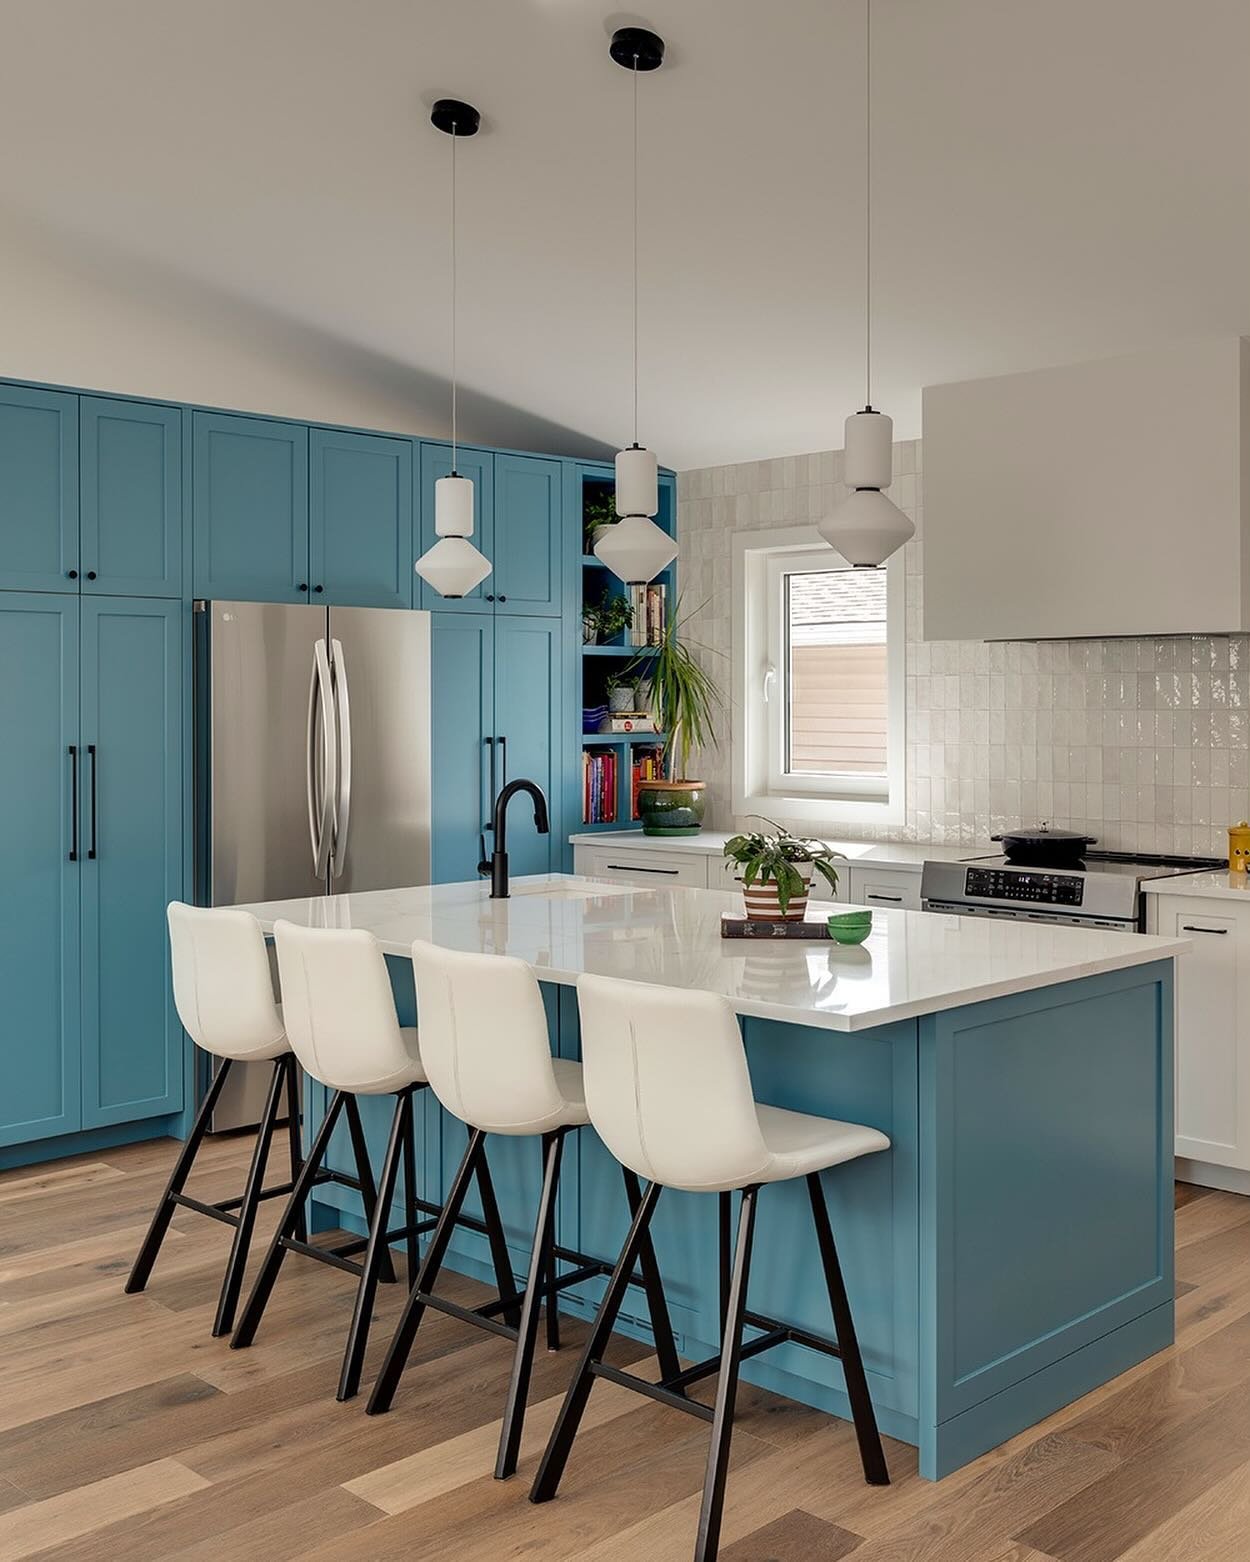 Had so much fun with @studiofelixyyc capturing this beautiful and bold kitchen she designed. 💙
.
.
#CalgaryPhotographer #CalgaryInteriorPhotographer #CalgaryInteriorDesignPhotographer  #CalgaryHomeBuilderPhotographer #CalgaryRealEstatePhotographer #